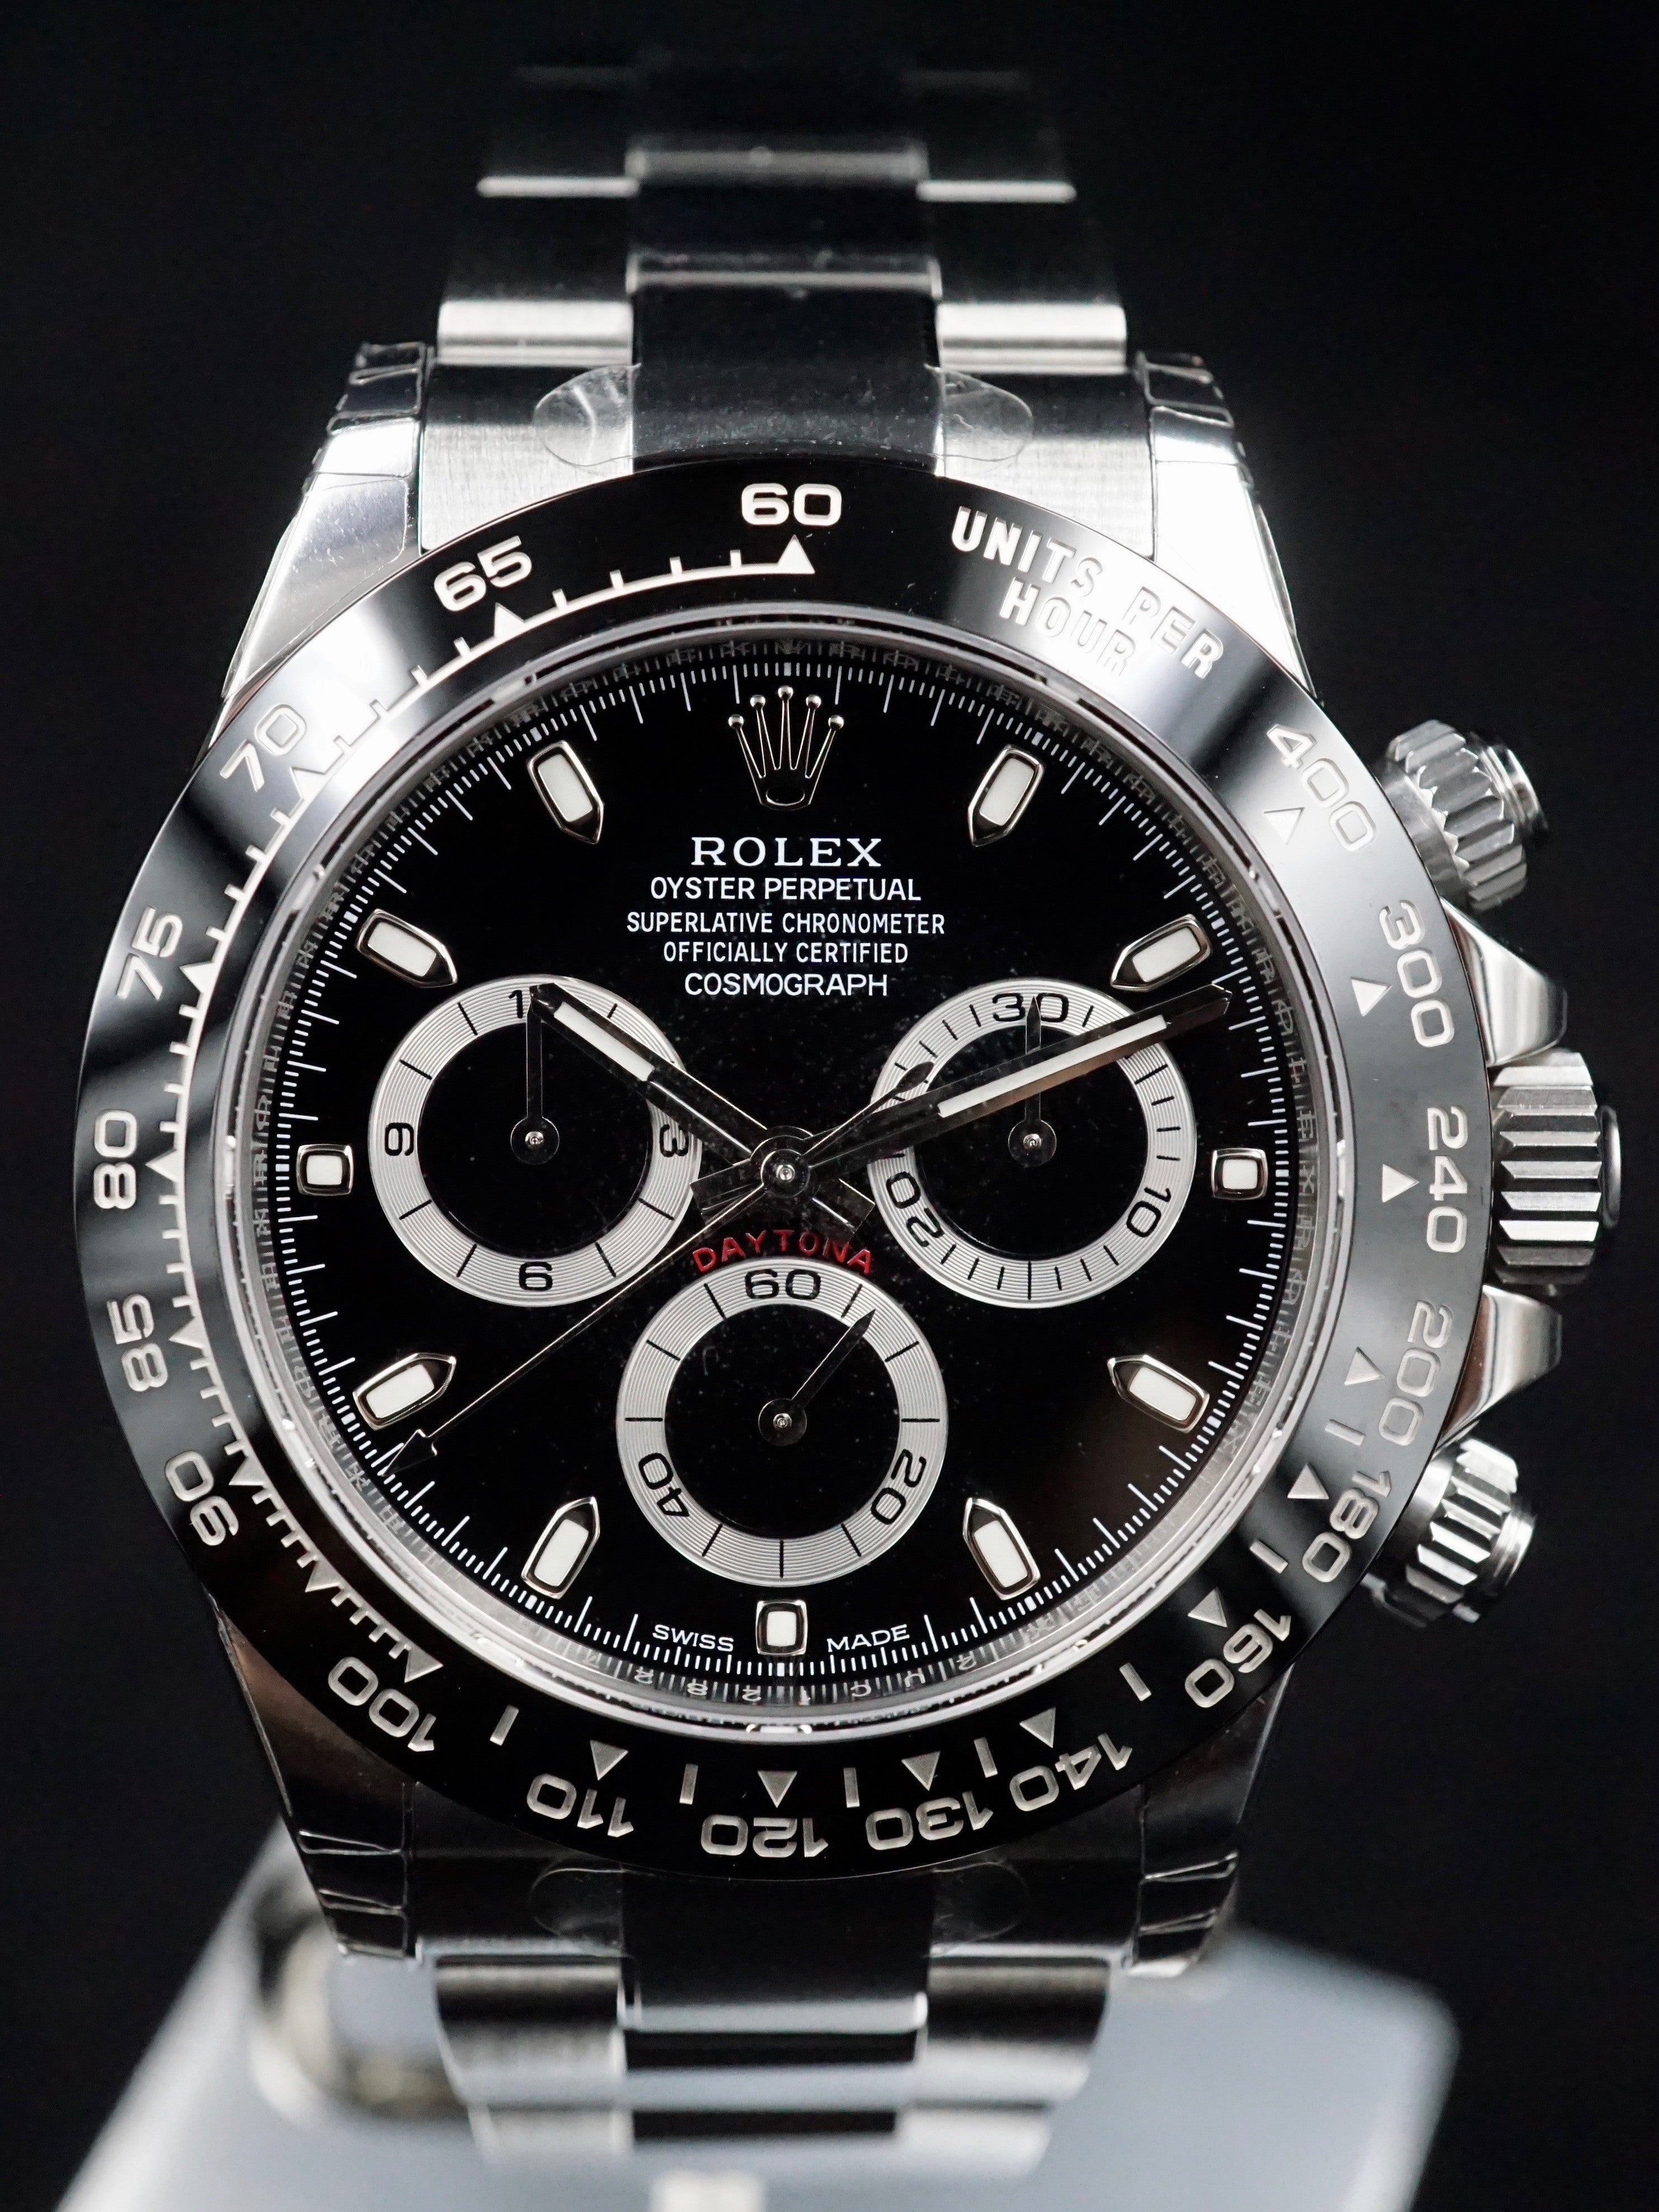 2017 Rolex Ceramic Daytona 116500LN Black Dial with Box and Papers